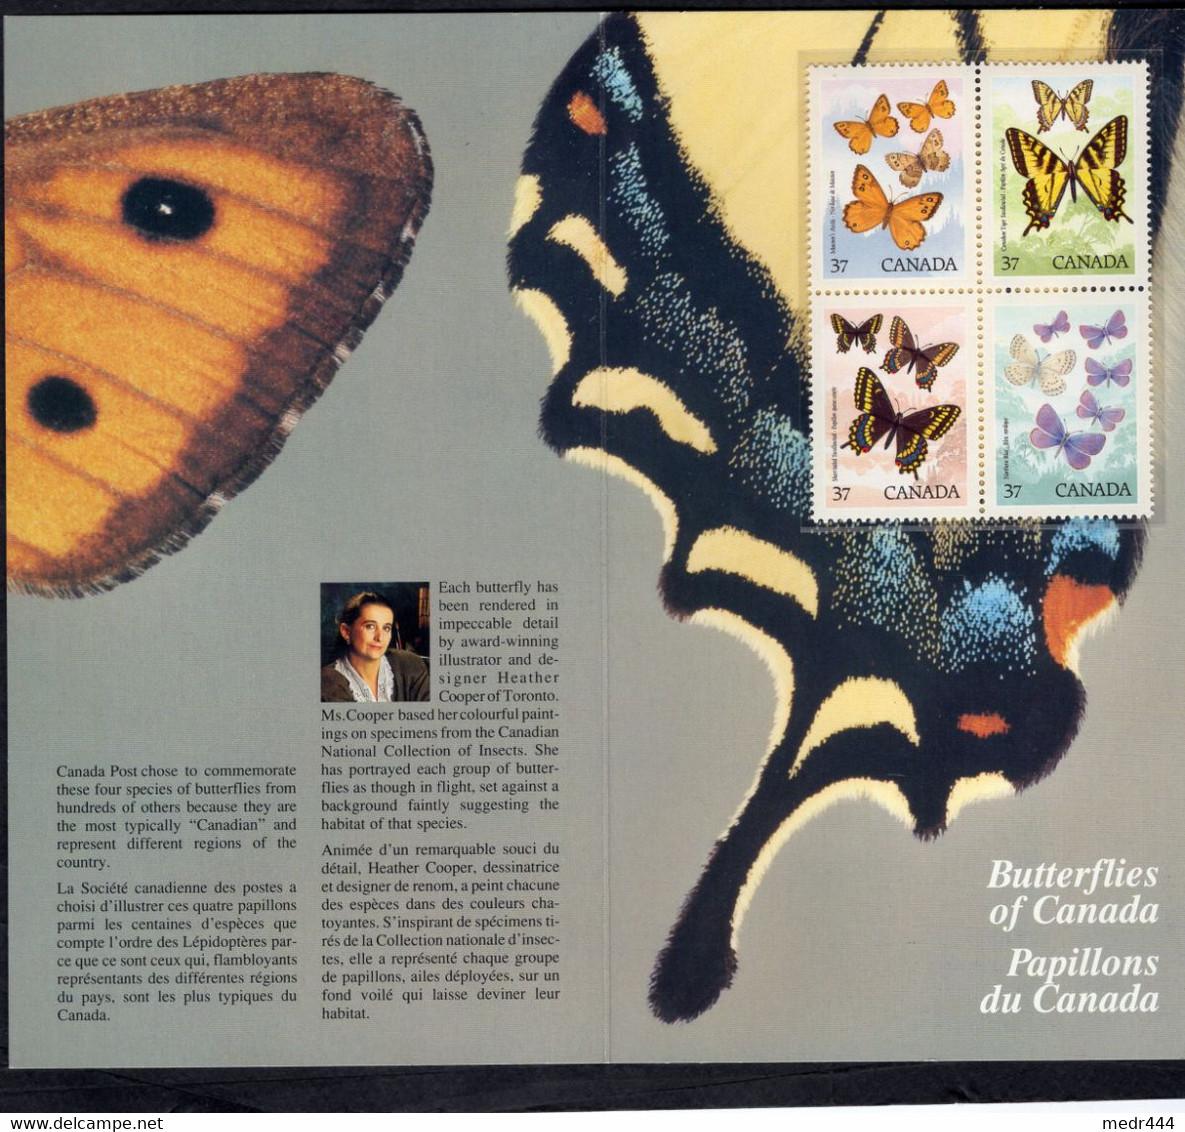 Canada 1988 - Butterflies Of Canana/Papillons Du Canada - Flyer + Stamps 4v - Complete Set - Excellent Quality - Post Office Cards